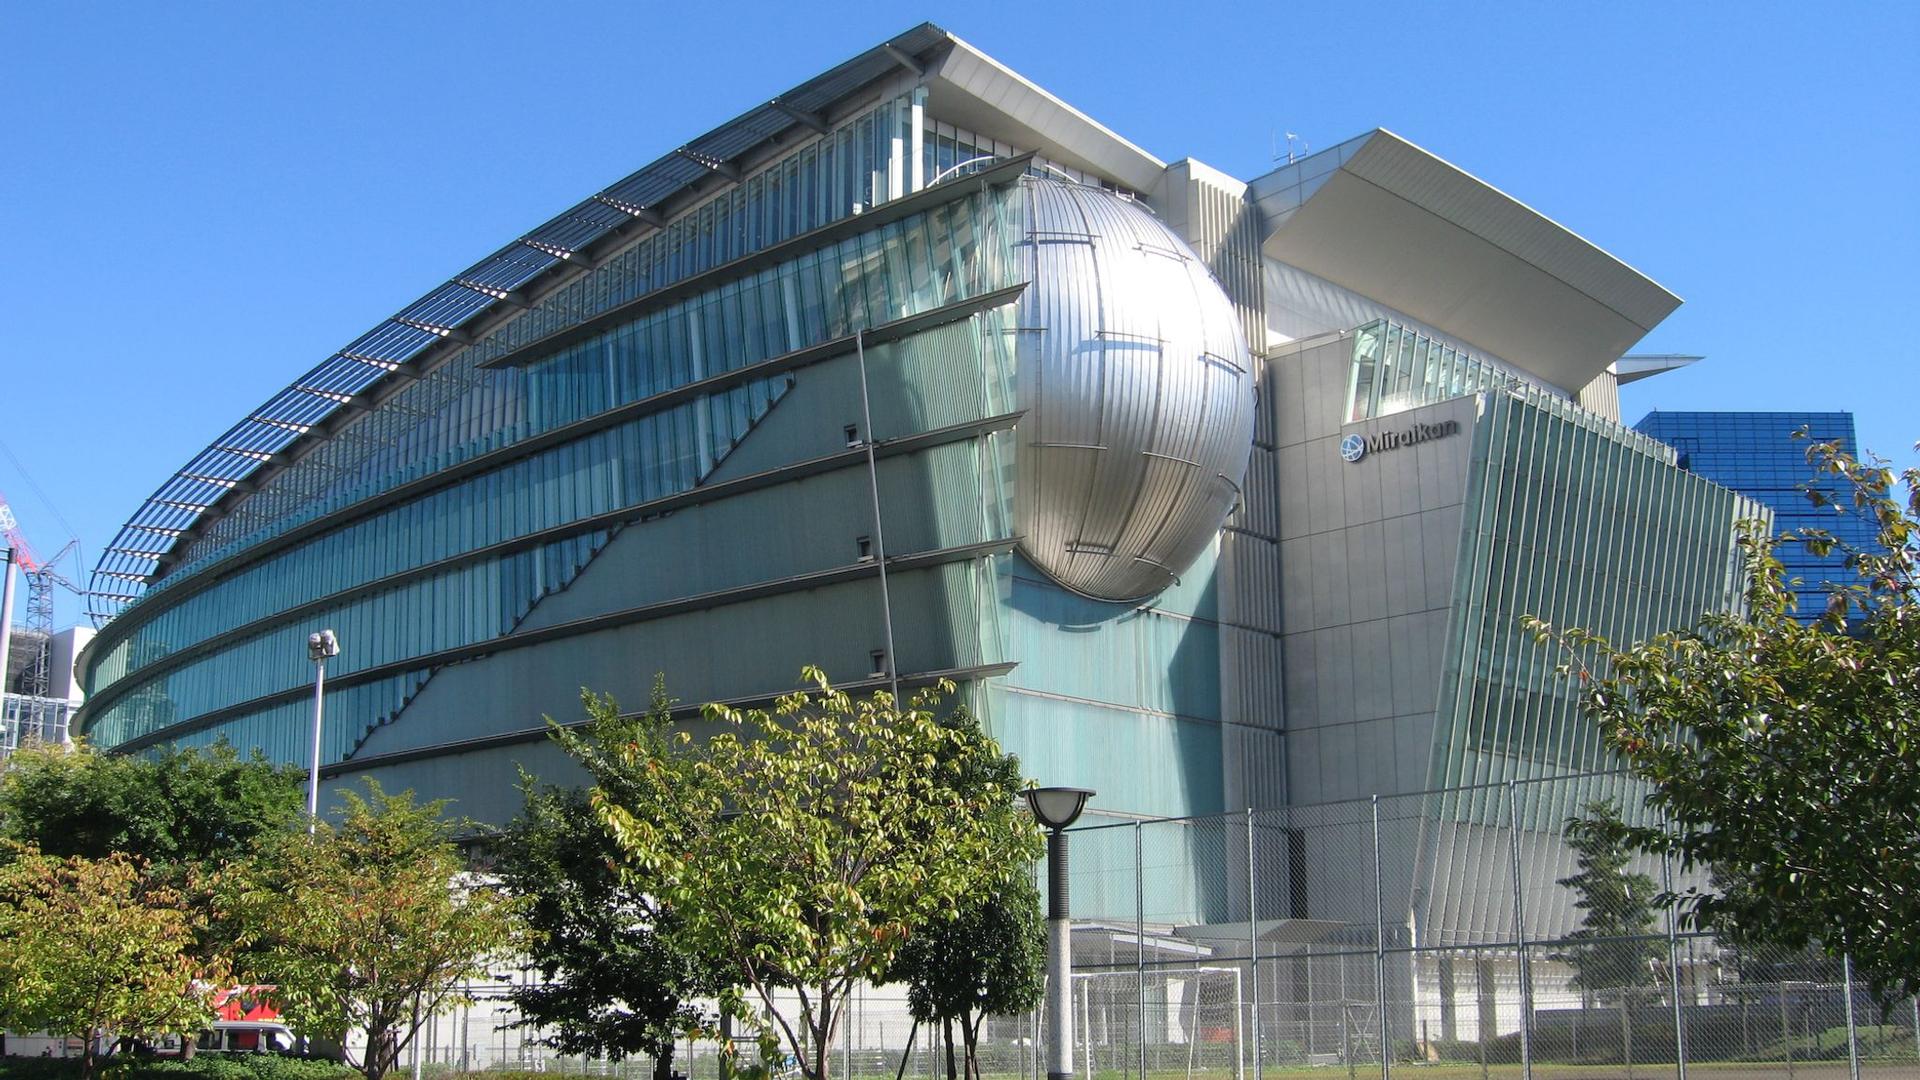 Miraikan - The National Museum of Emerging Science and Innovation